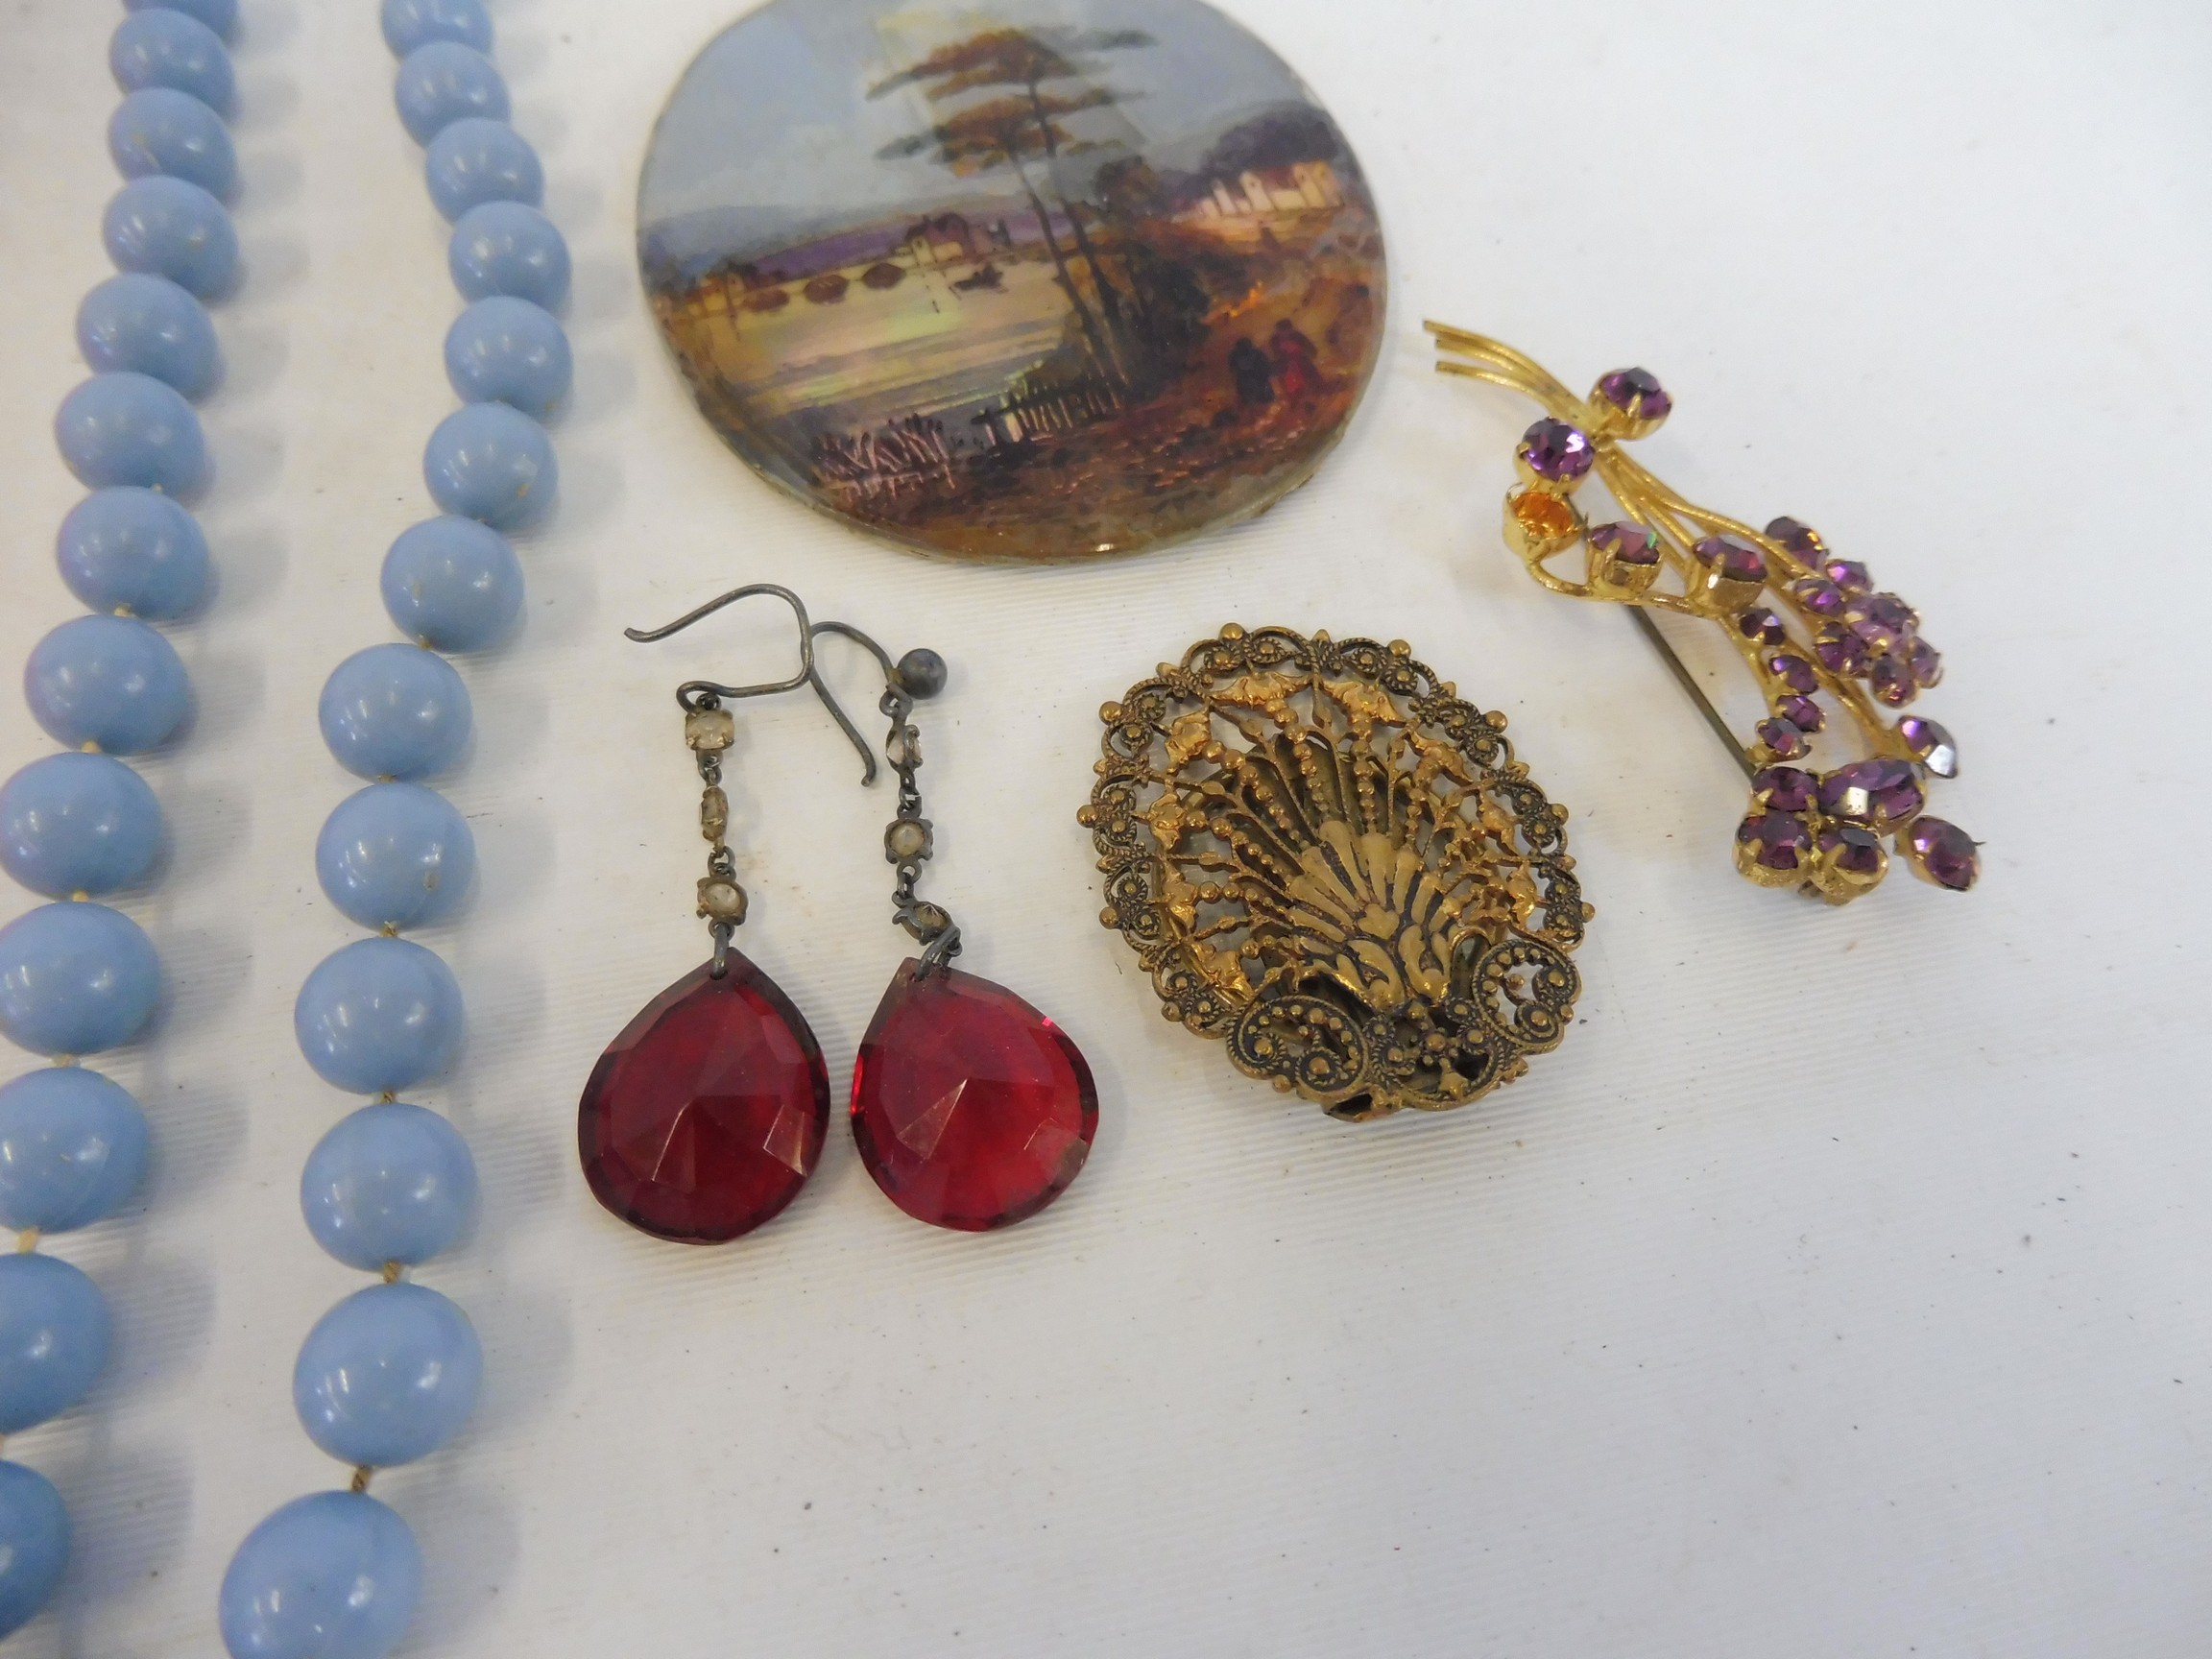 An oval glass fronted landscape scene, various brooches, bracelets etc. - Image 2 of 4